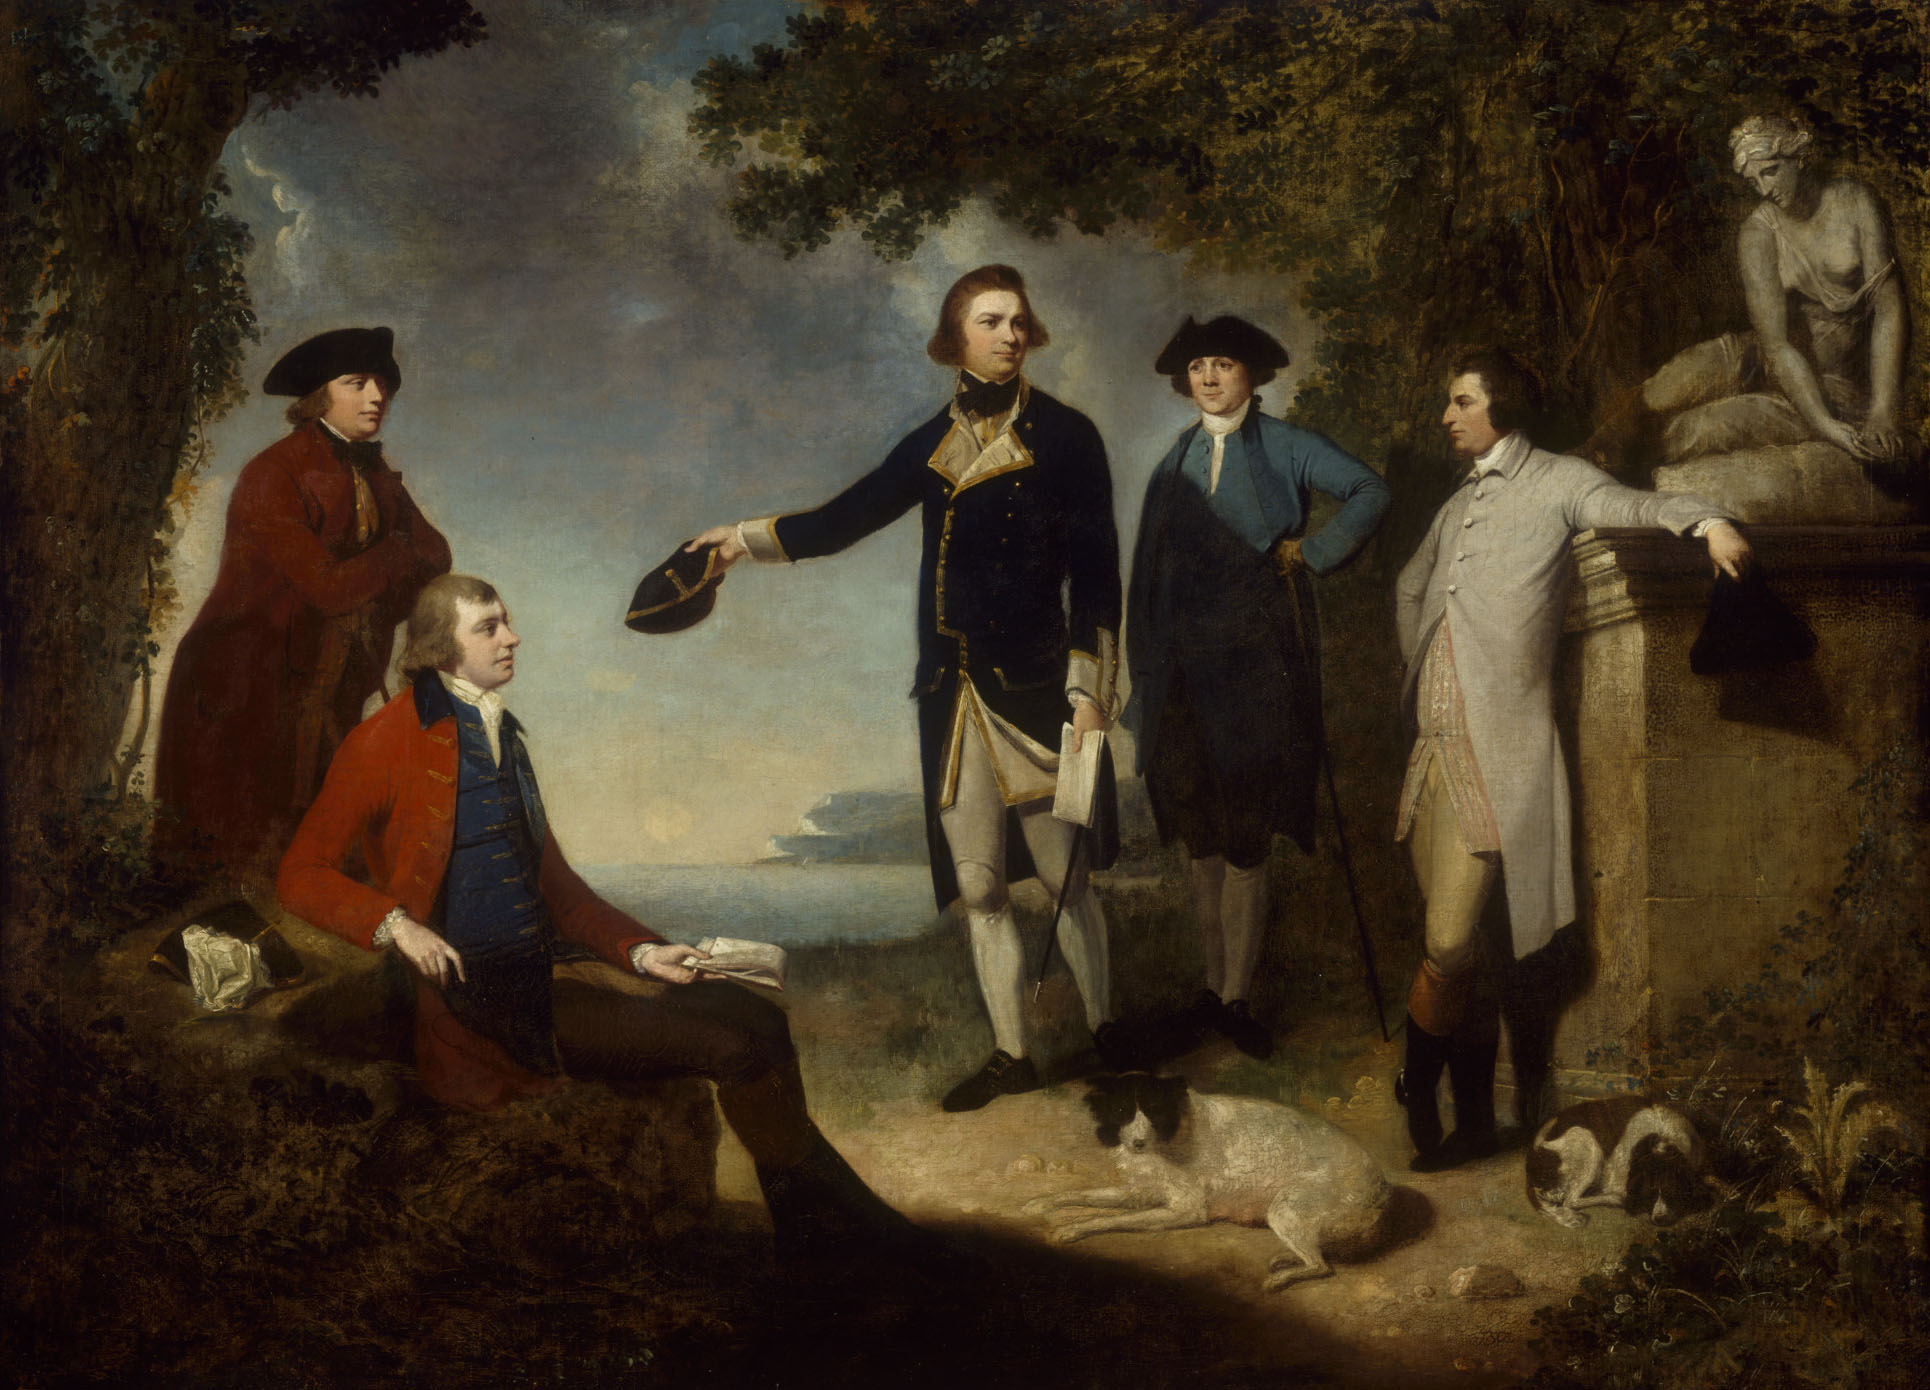 Painting by John Hamilton Mortimer showing from left: Dr Daniel Solander, Sir Joseph Banks, Captain James Cook, Dr John Hawkesworth and Lord Sandwich.